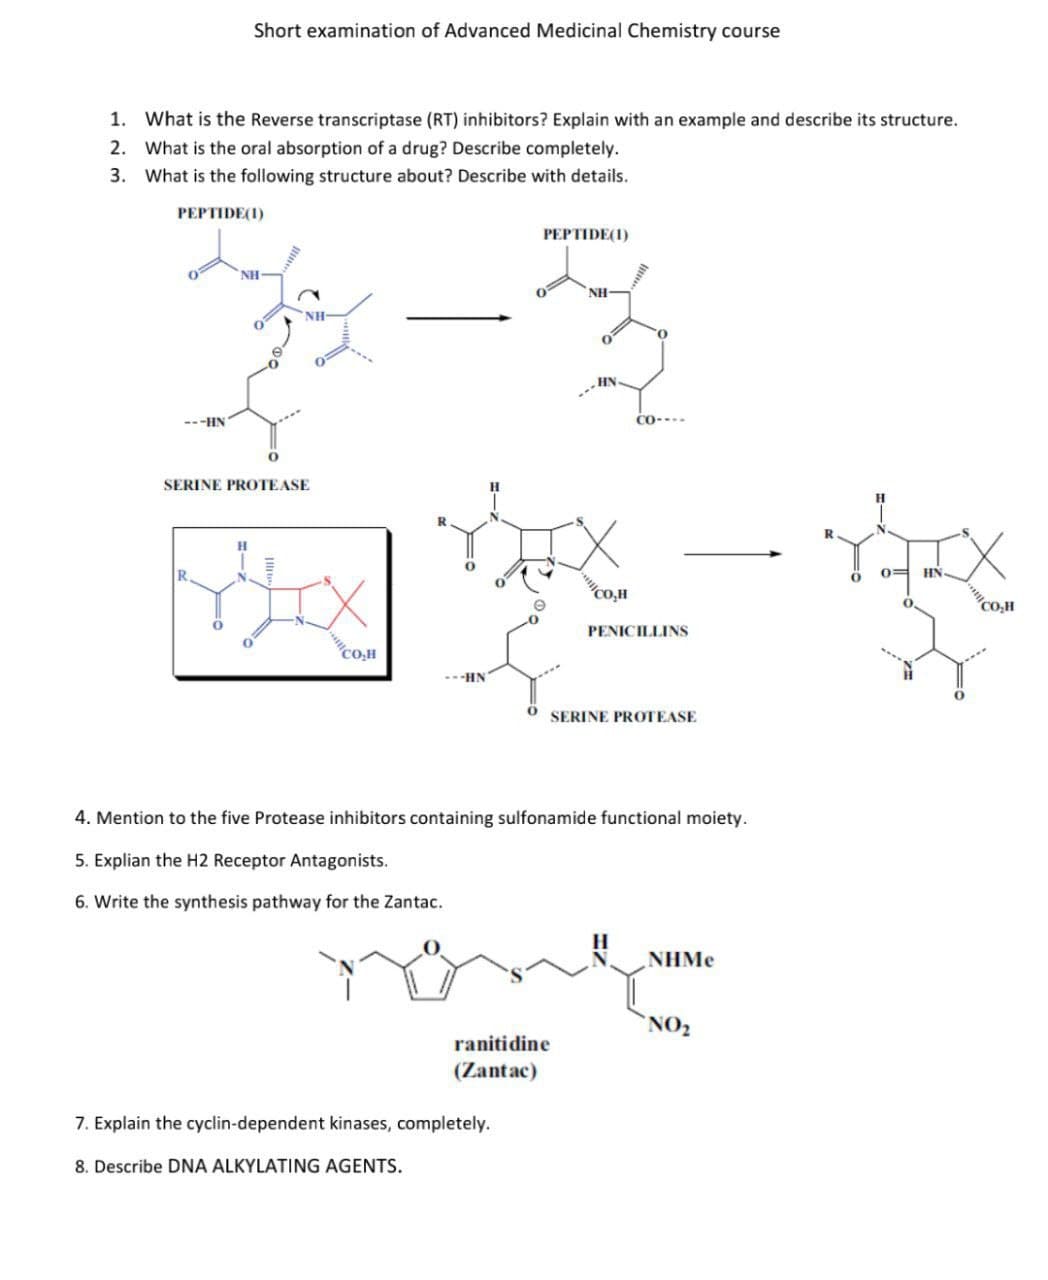 Short examination of Advanced Medicinal Chemistry course
1. What is the Reverse transcriptase (RT) inhibitors? Explain with an example and describe its structure.
2. What is the oral absorption of a drug? Describe completely.
3. What is the following structure about? Describe with details.
PEPTIDE(1)
PEPTIDE(1)
NH
NH
NH
HN
CO----
---HN
0
SERINE PROTEASE
0=
YX
MIX
HN
Co,H
O
CO₂H
PENICILLINS
CO₂H
---HN
SERINE PROTEASE
4. Mention to the five Protease inhibitors containing sulfonamide functional moiety.
5. Explian the H2 Receptor Antagonists.
6. Write the synthesis pathway for the Zantac.
NHMe
none
NO₂
ranitidine
(Zantac)
7. Explain the cyclin-dependent kinases, completely.
8. Describe DNA ALKYLATING AGENTS.
R